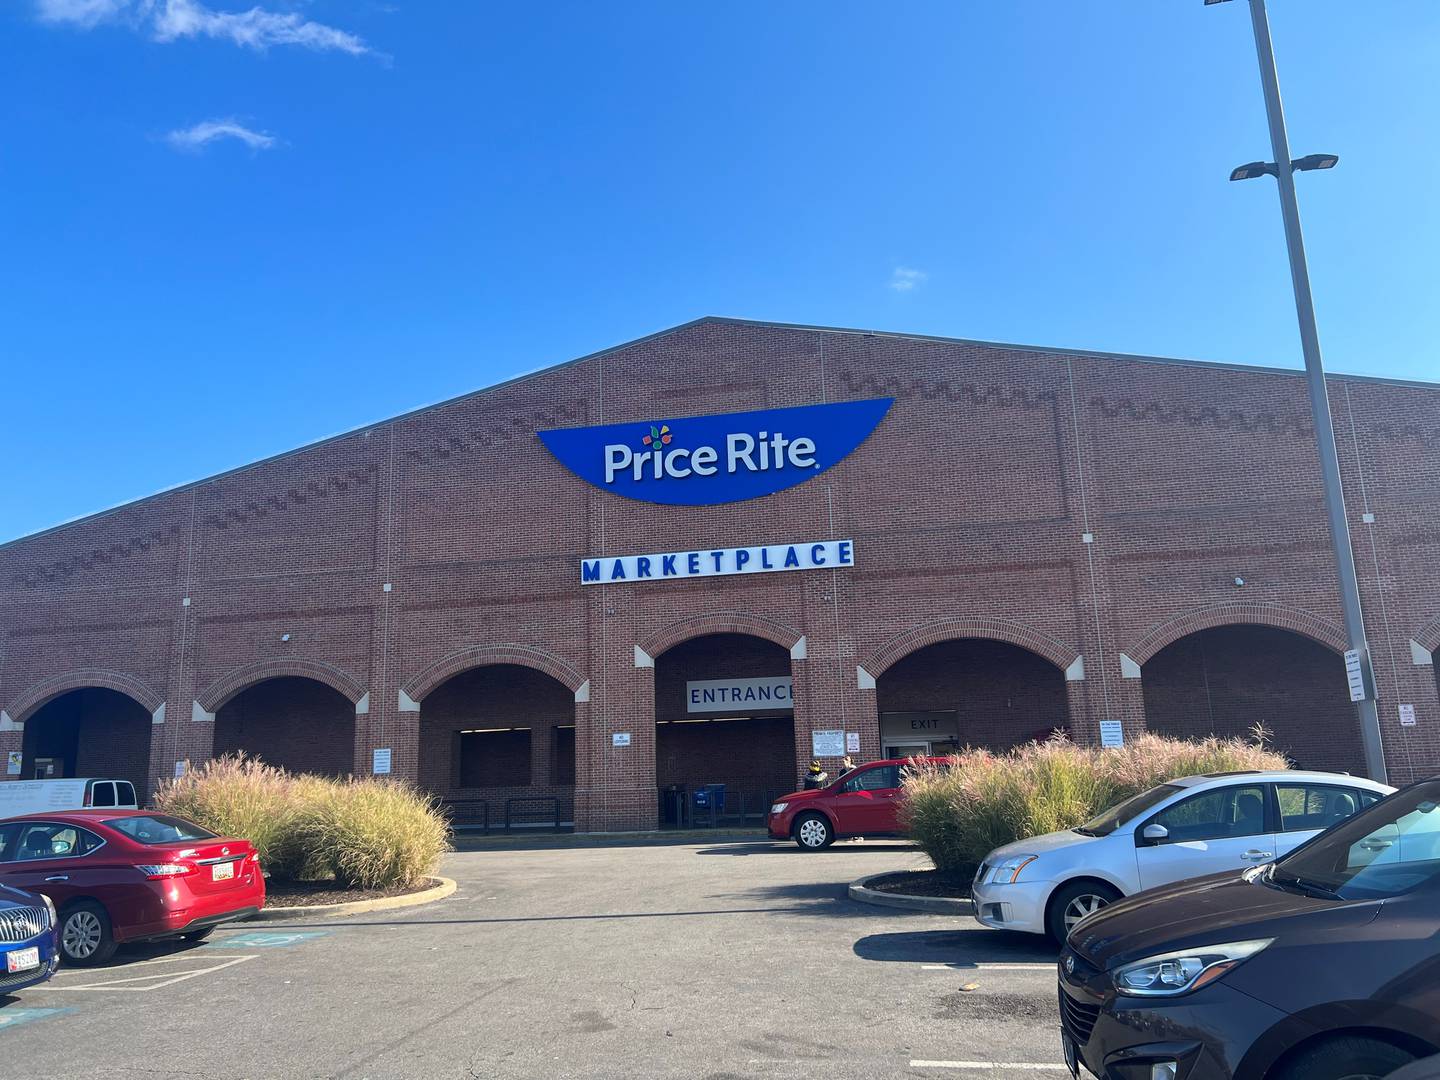 The Price Rite in the Mount Clare Junction shopping center is closing by year's end, leaving residents concerned about access to fresh produce and other food items.